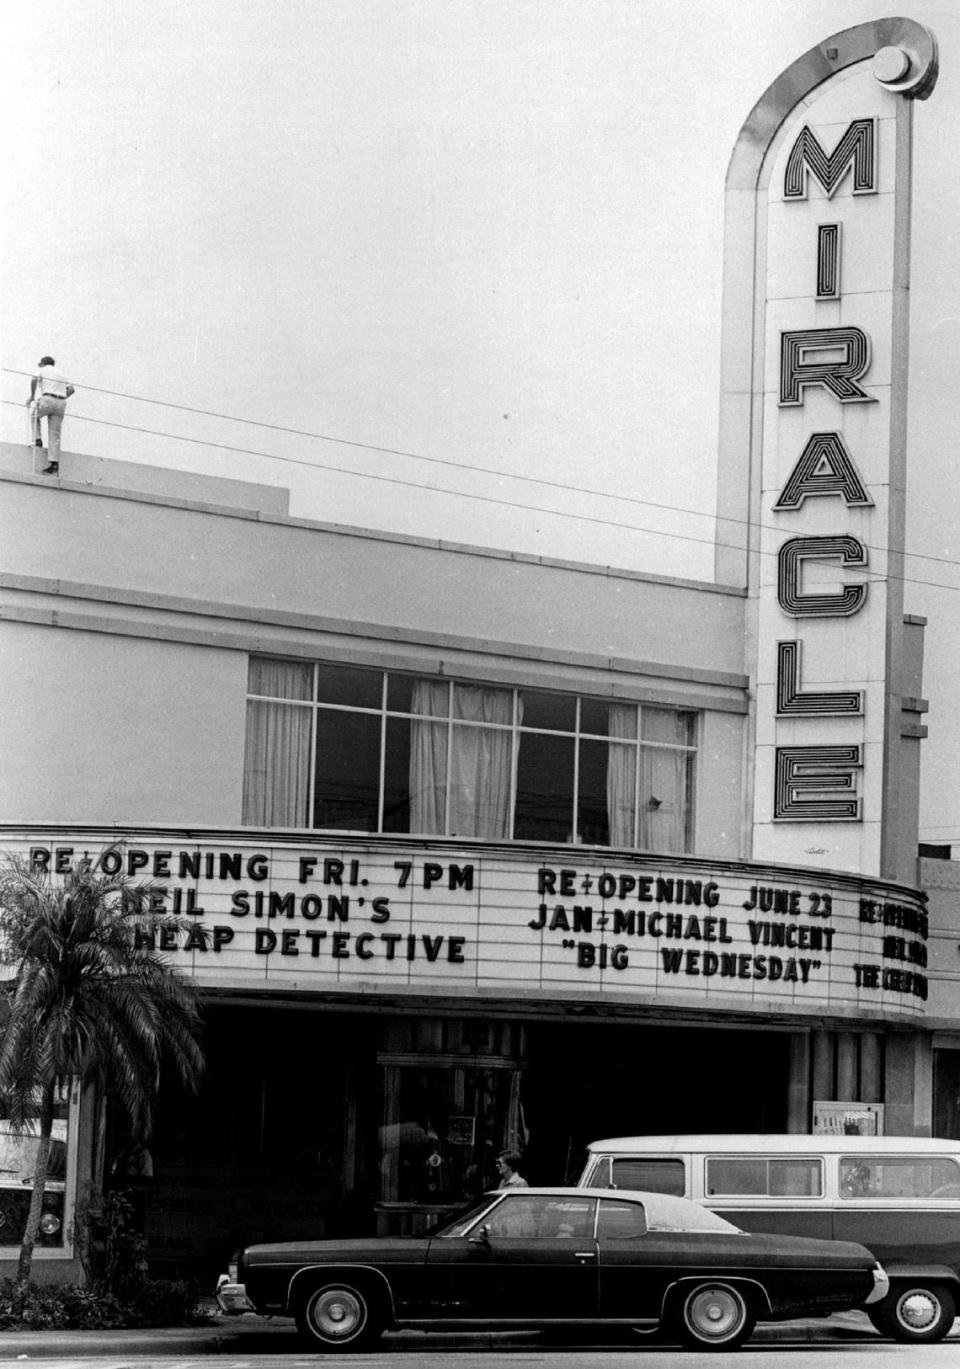 In this file photo from 1978, the Miracle Theatre in Coral Gables, then owned by Wometco, was undergoing renovations to go from a single screen movie palace to a two-screen Miracle Twin. Films showing that summer of 1978 at the Miracle included “Neal Simon’s Cheap Detective” and “Big Wednesday,” starring Jan-Michael Vincent.